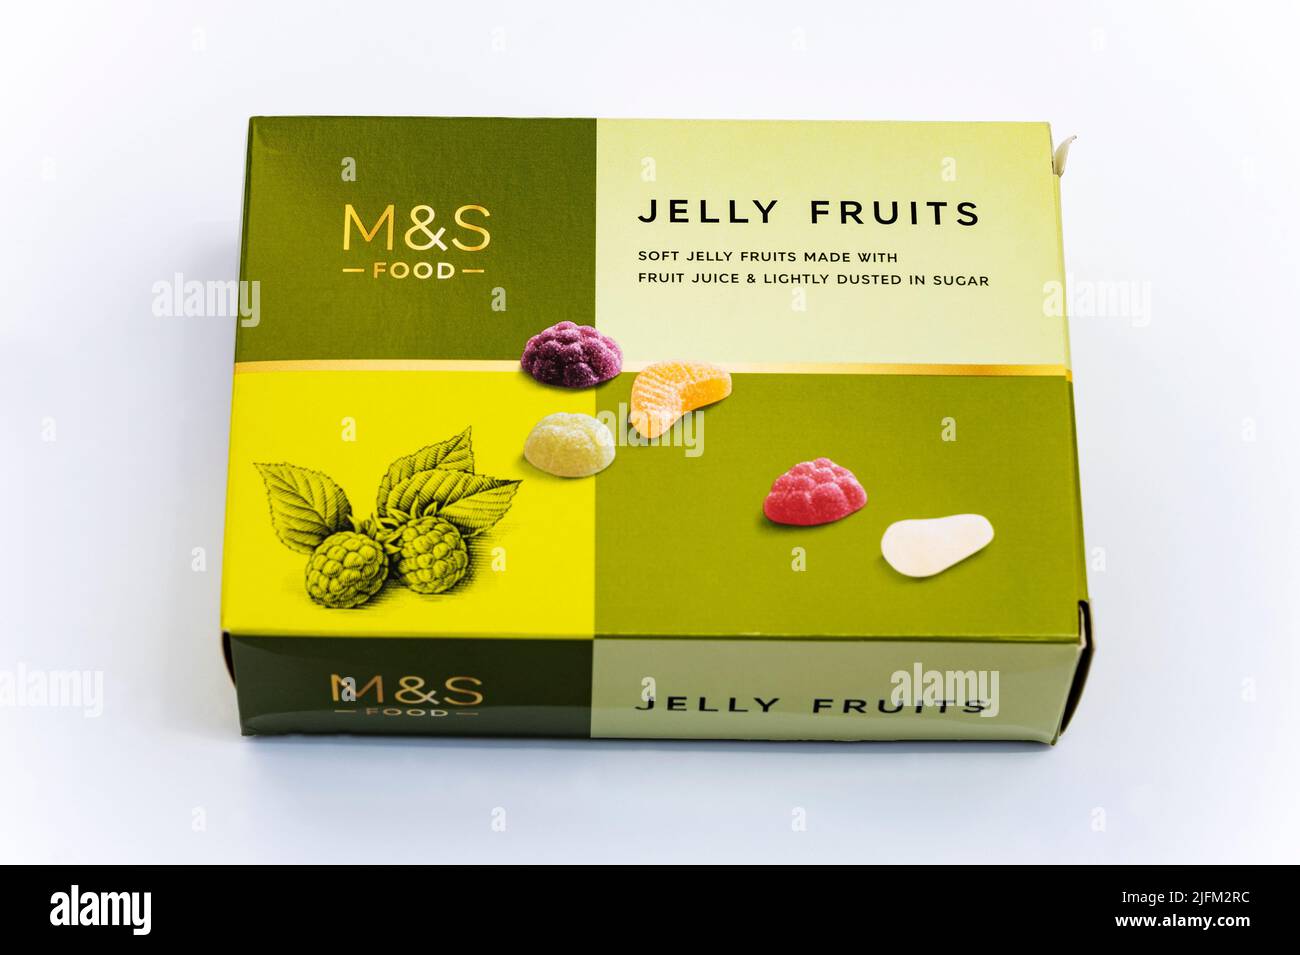 M&S Foods jelly fruits Stock Photo